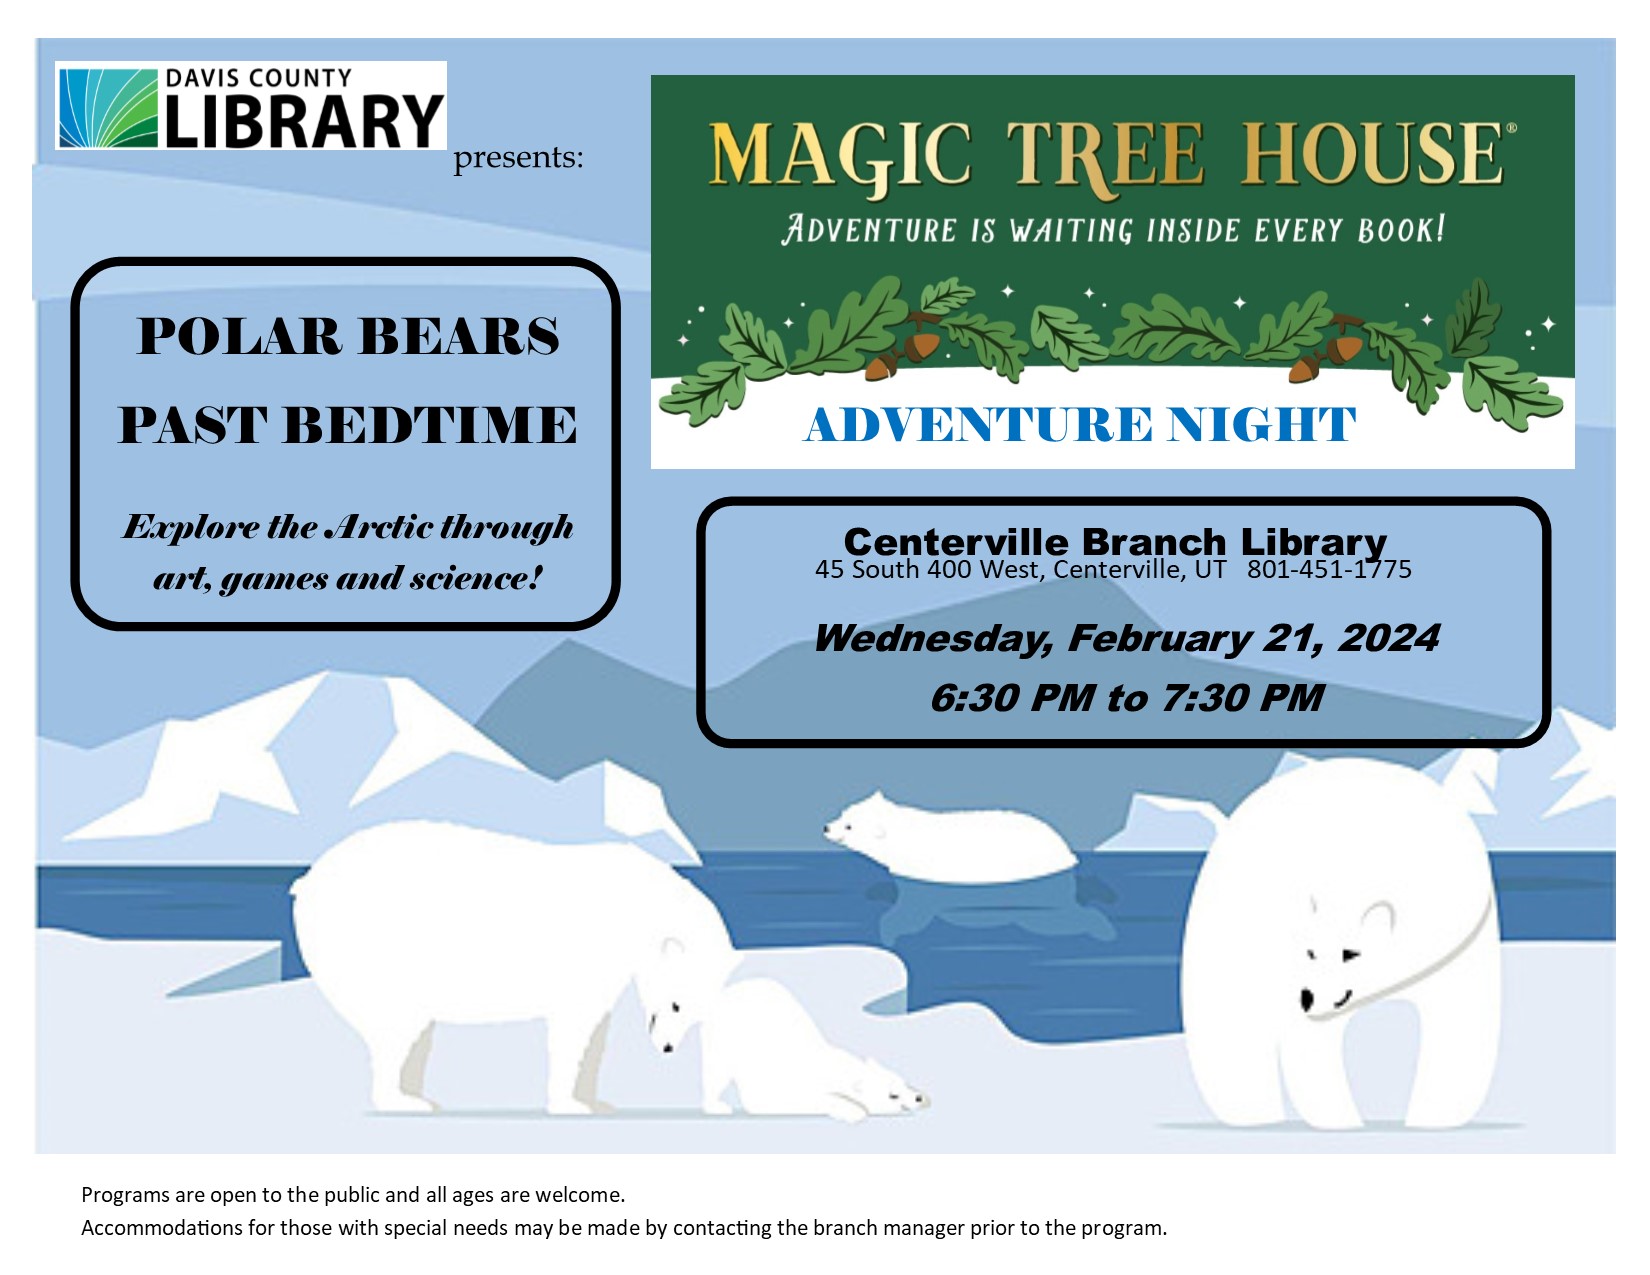 Explore the Arctic at a Magic Treehouse Adventure night with games, science experiments and art. 